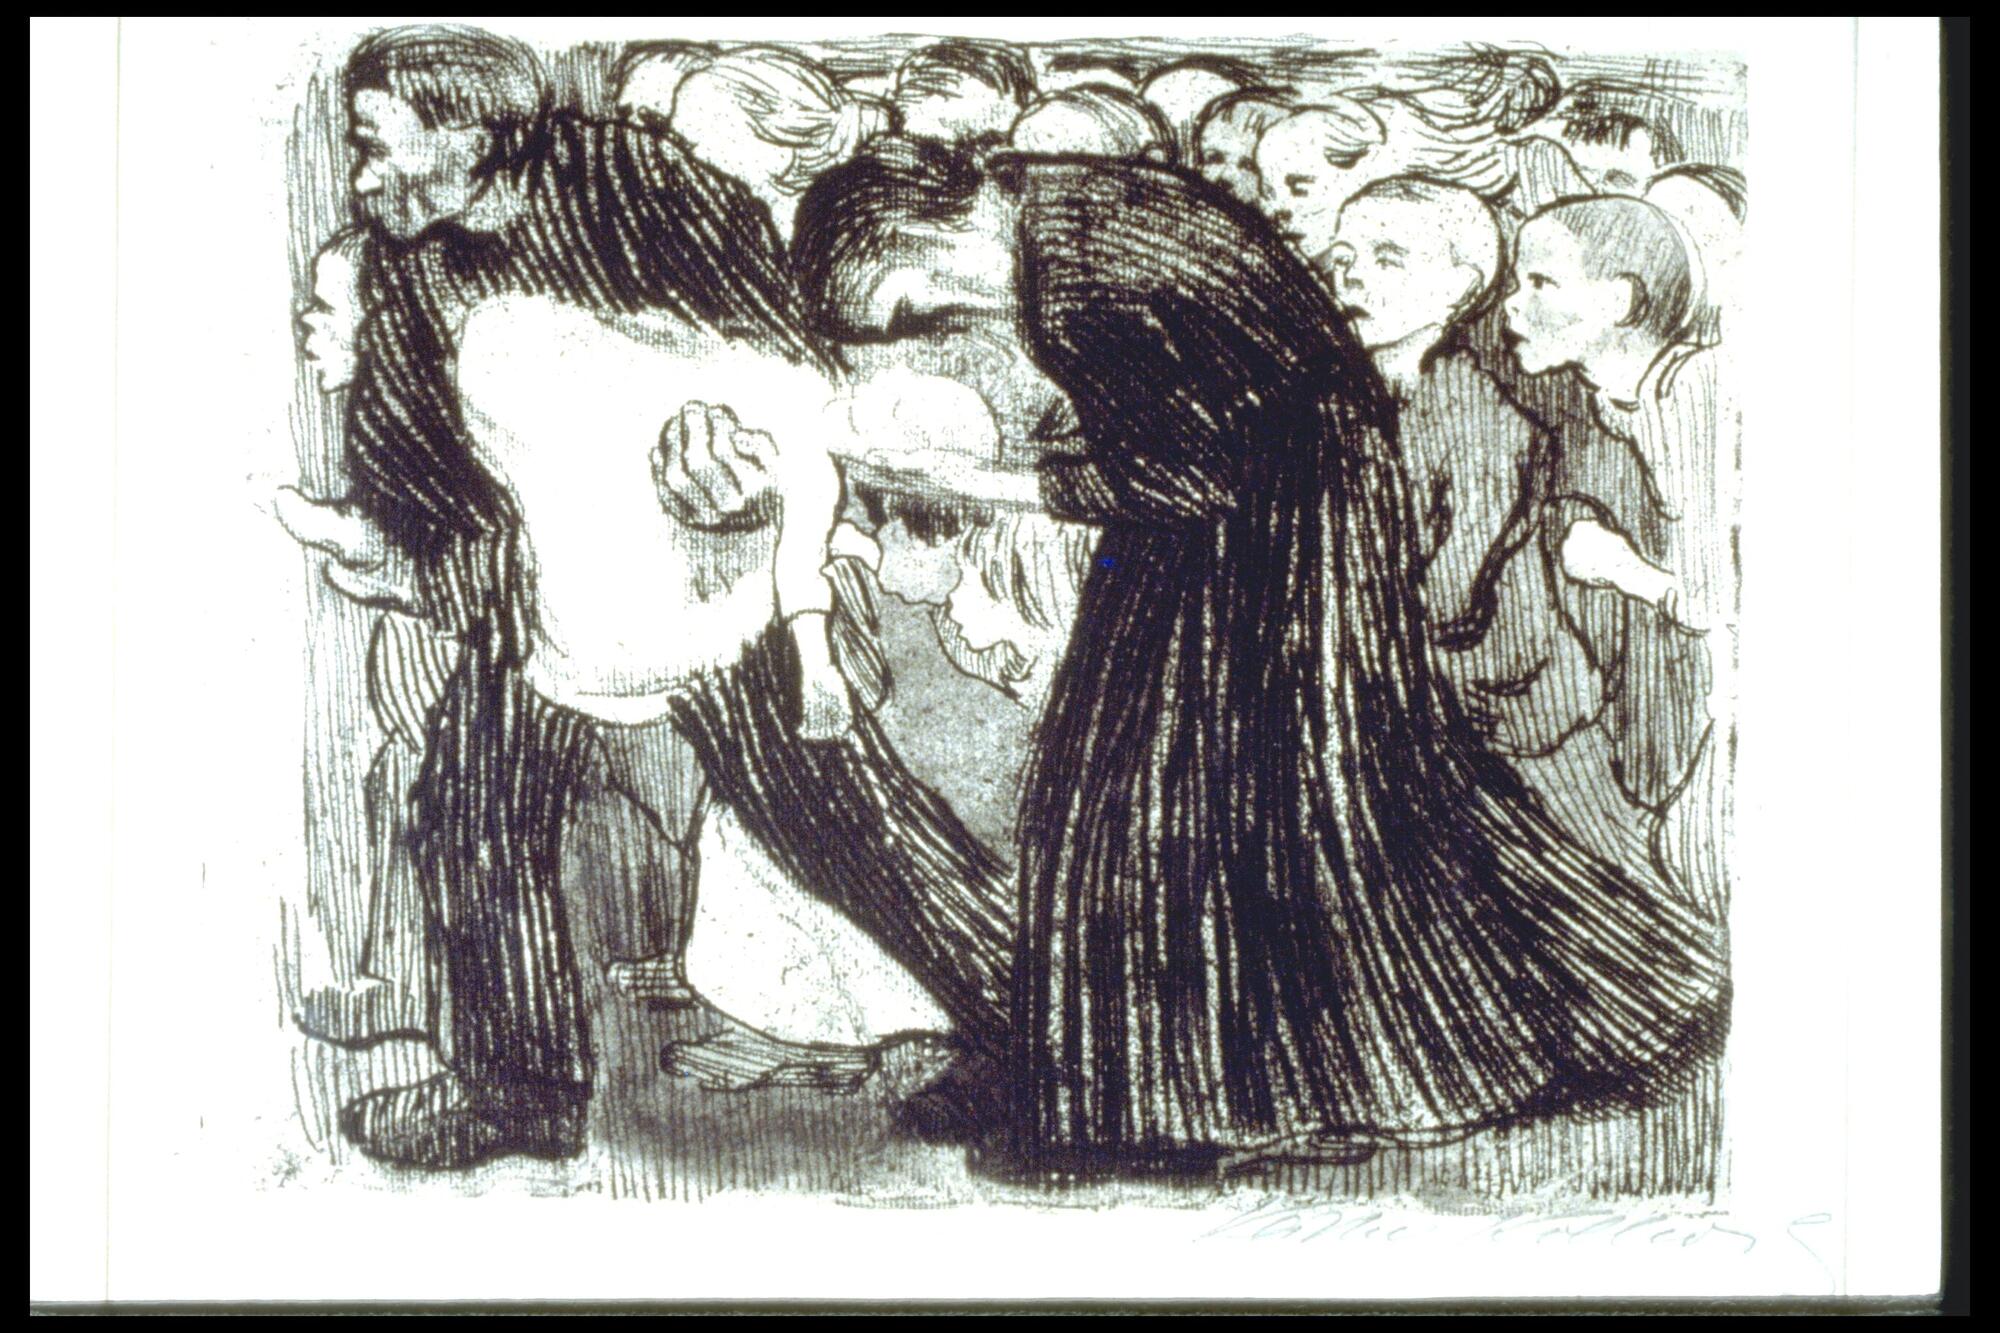 In the foreground, a man and a woman carry a child as they move to the left of the page. The man carries the child&#39;s body, while the woman holds the childs head. The man&#39;s face is turned towards the left, while the woman&#39;s head is bowed toward the child. The man and woman are dressed in dark clothes, while the child is shown in white. The child&#39;s arm hangs limp. A crowd of children is gathered in the background, looking at the three main figures.